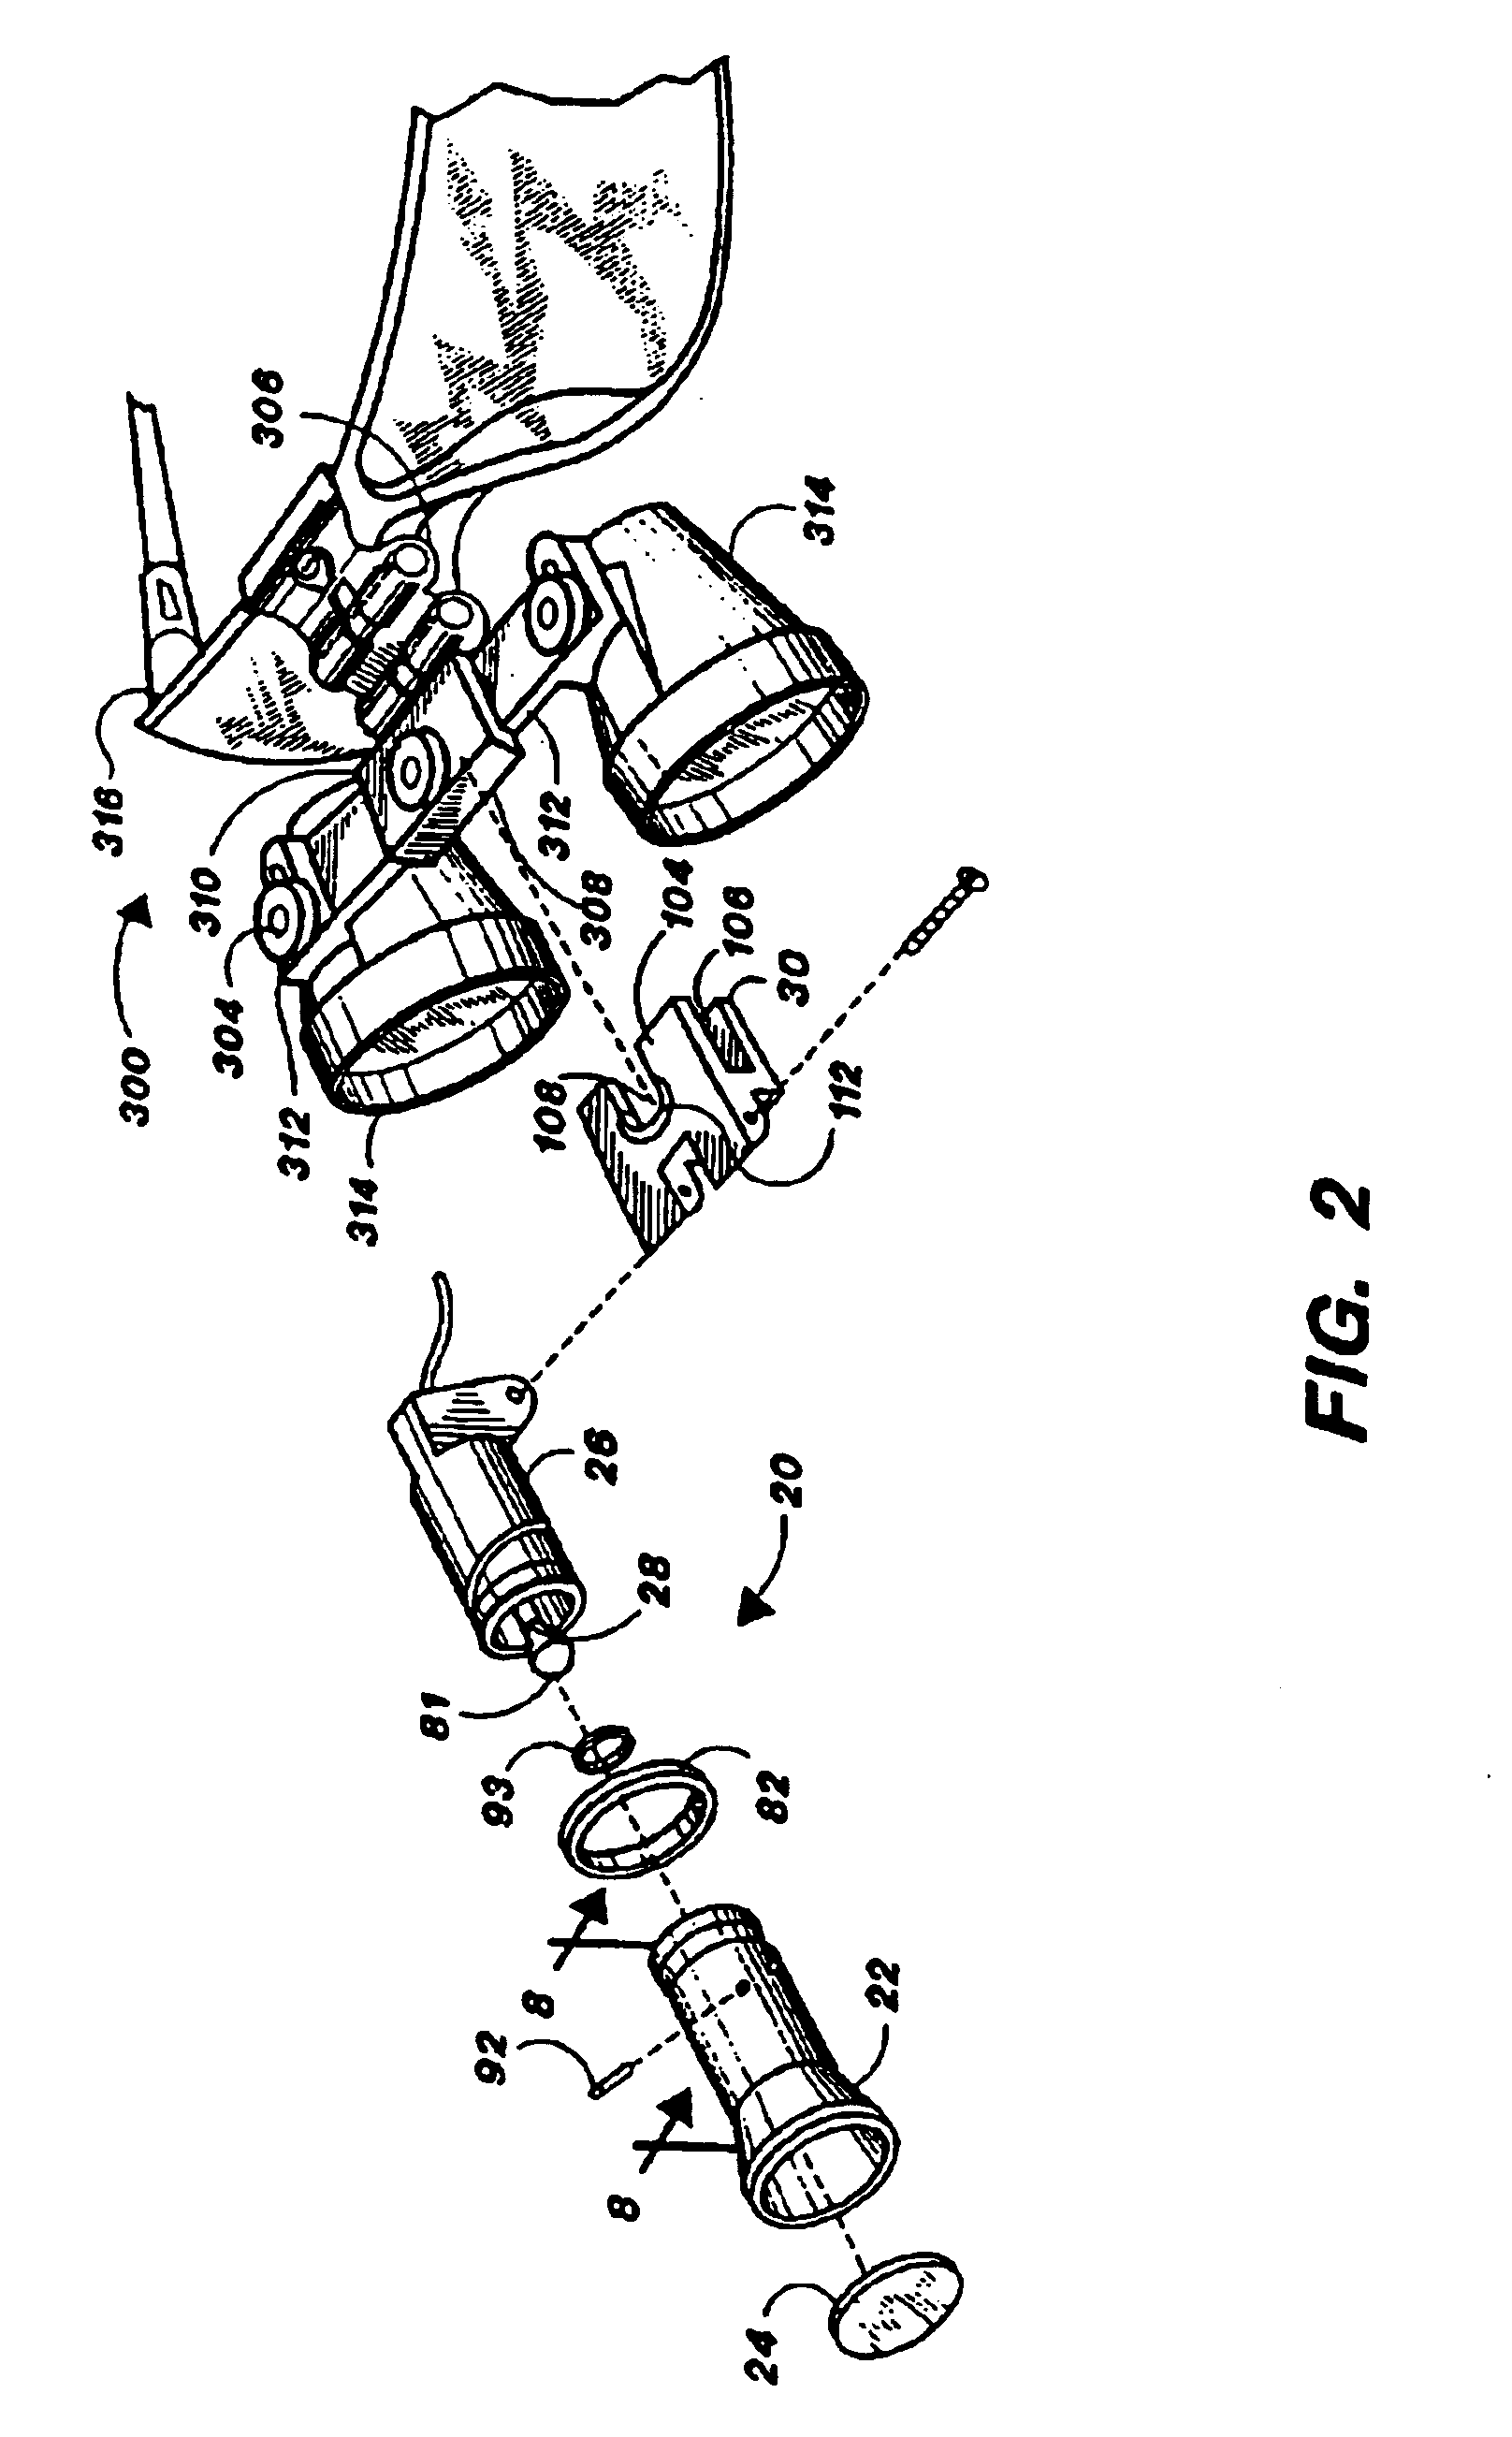 Illumination assembly for dental and medical applications